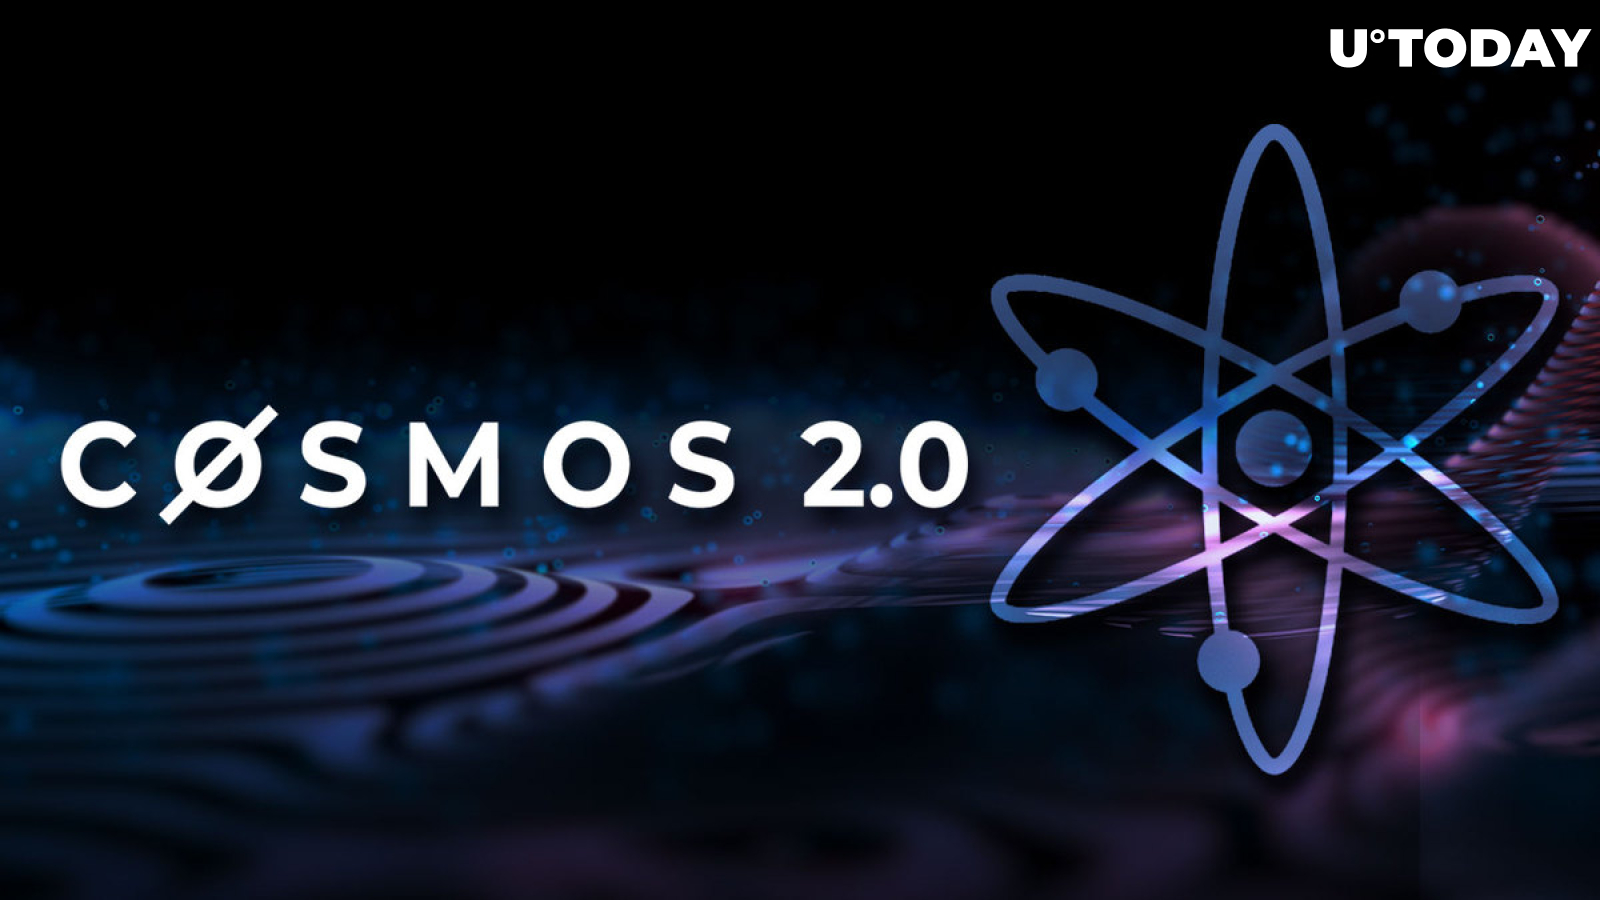 Cosmos 2.0 (ATOM) Proposal Voting Campaign Has Started: Details